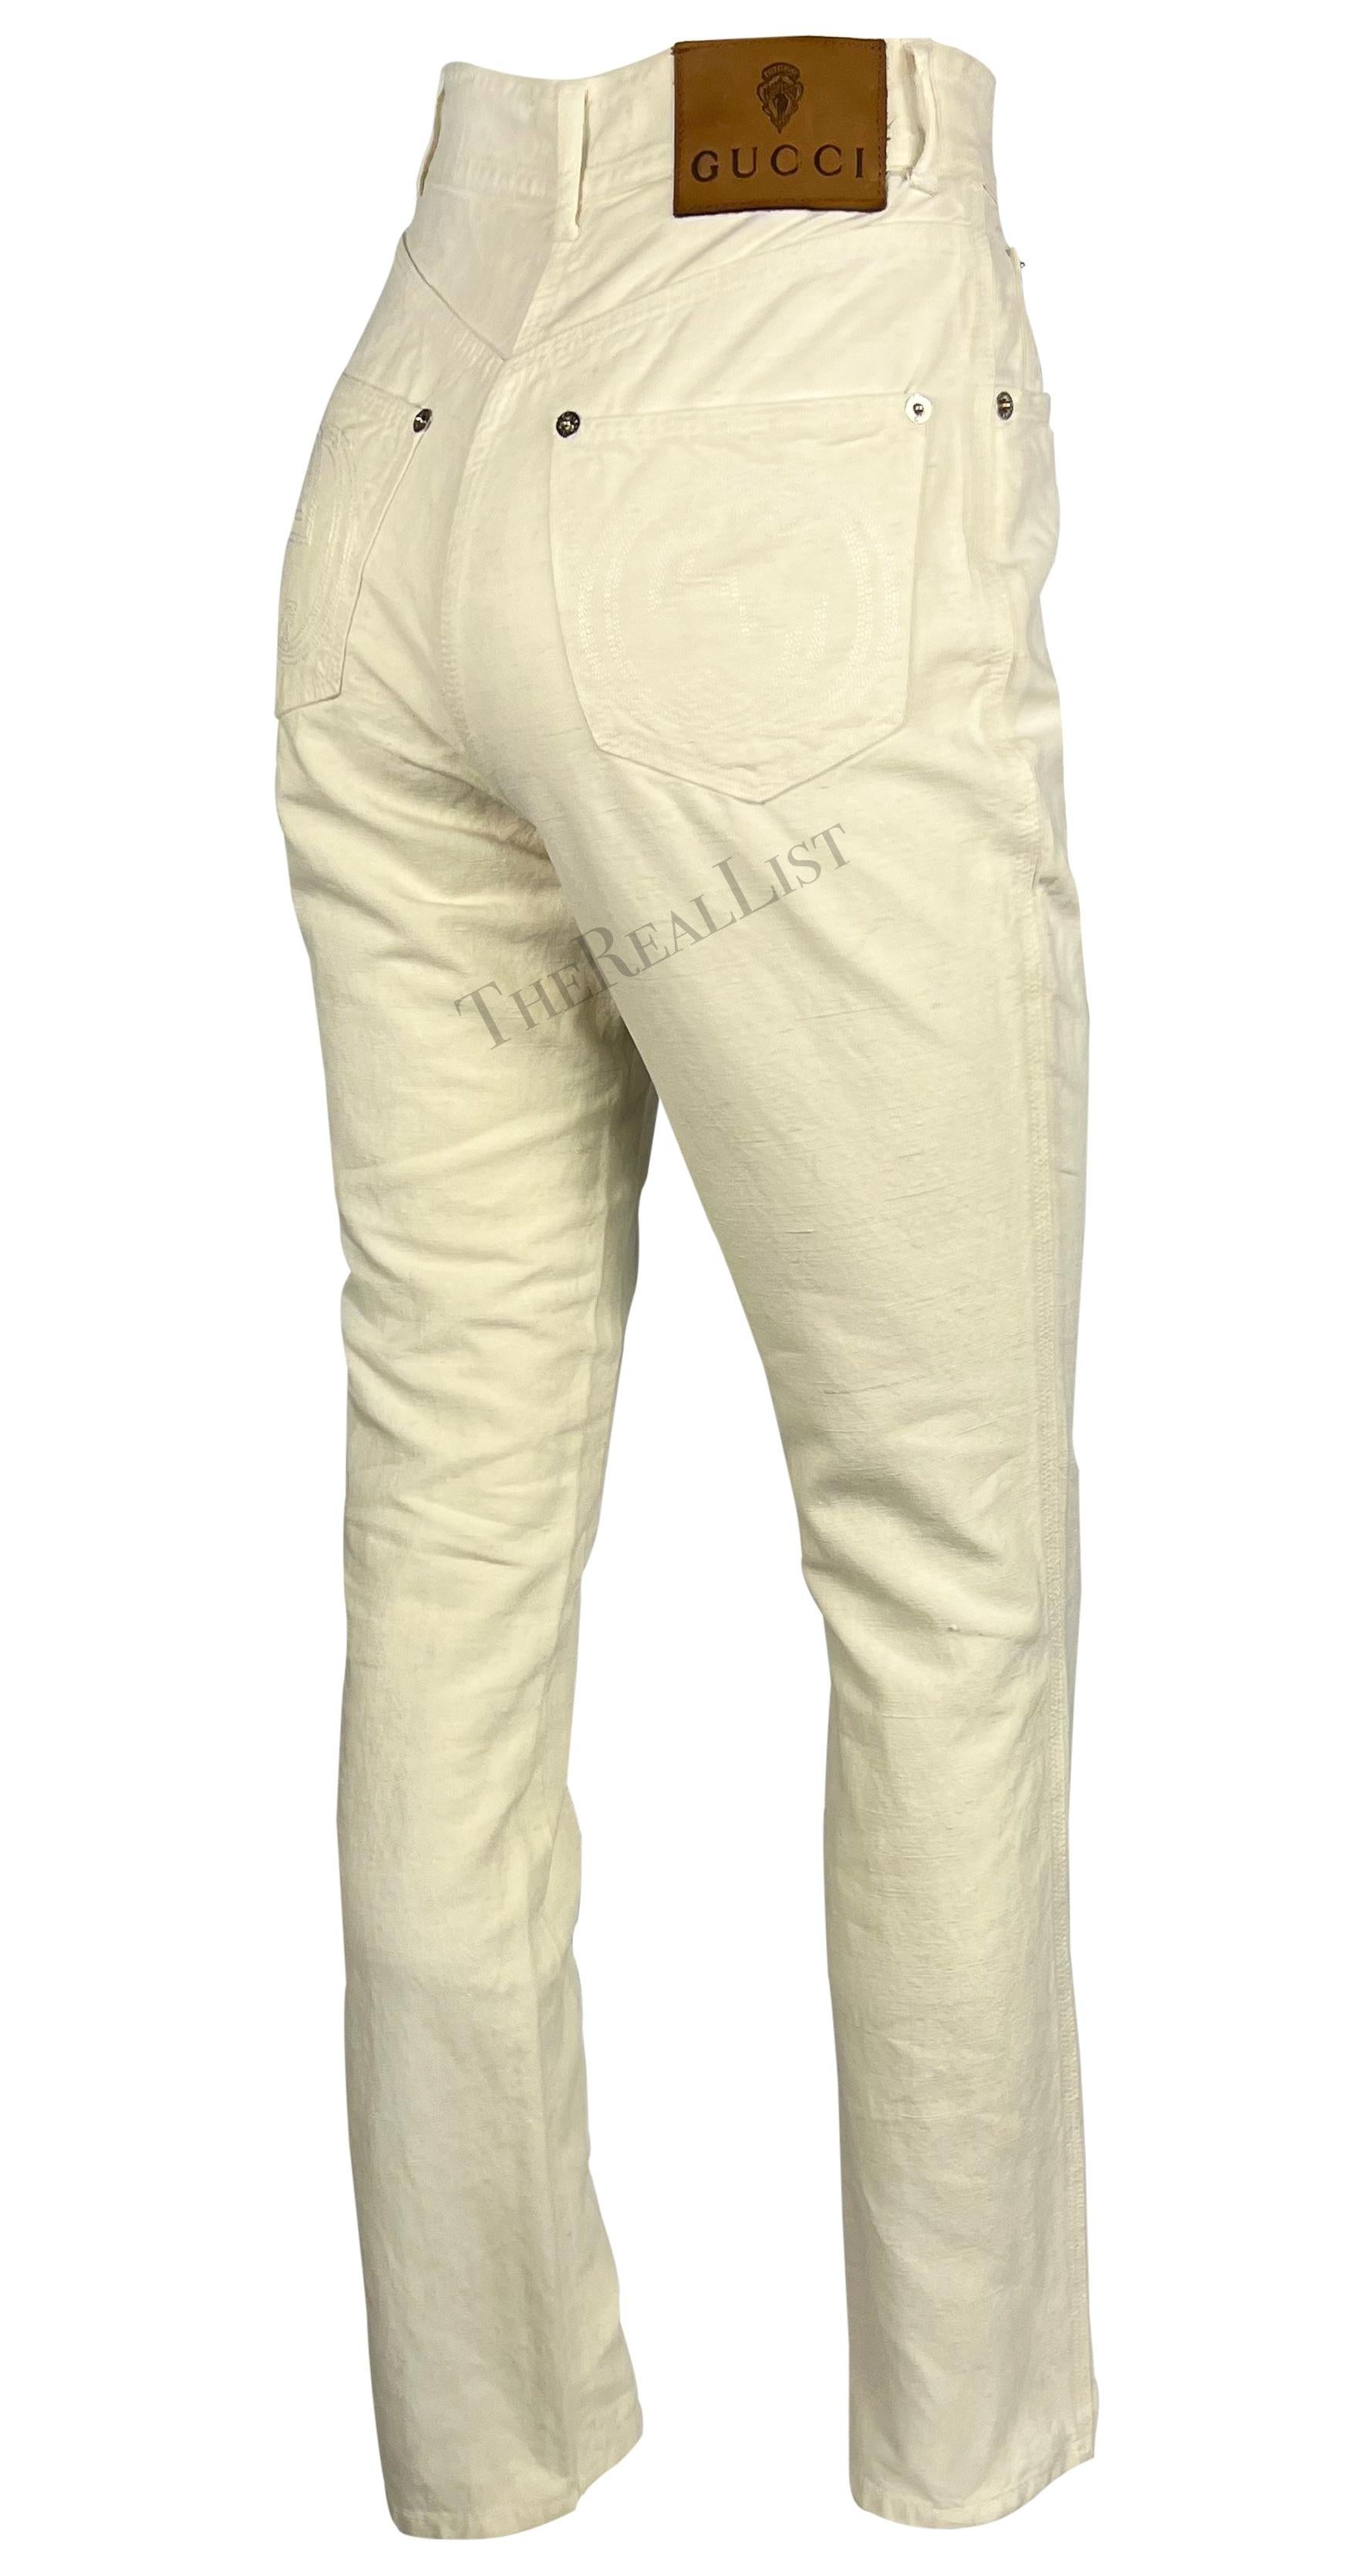 NWT S/S 1995 Gucci by Tom Ford GG Cream Cotton Linen Jeans In Excellent Condition For Sale In West Hollywood, CA